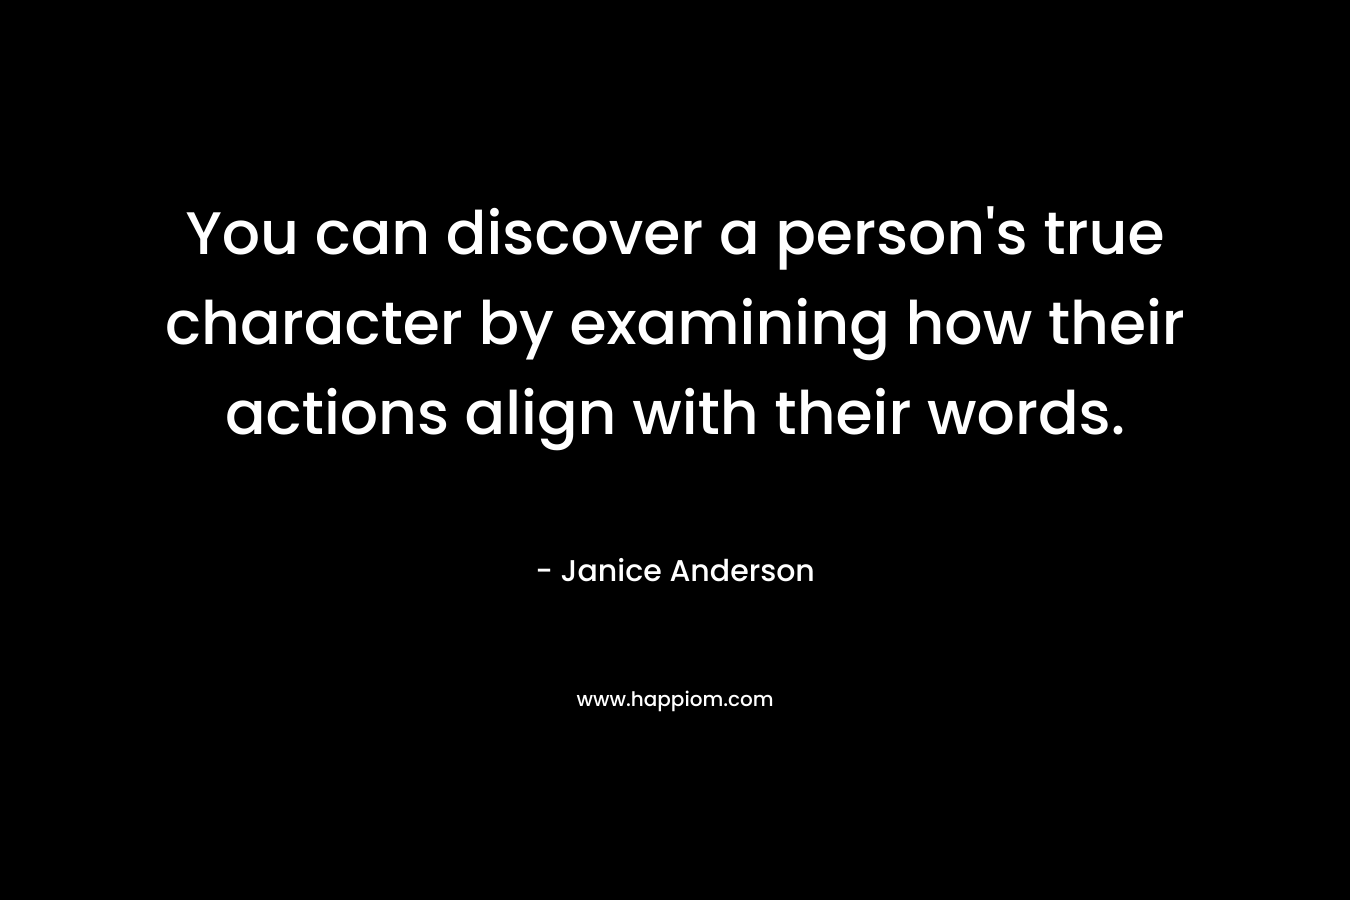 You can discover a person's true character by examining how their actions align with their words.